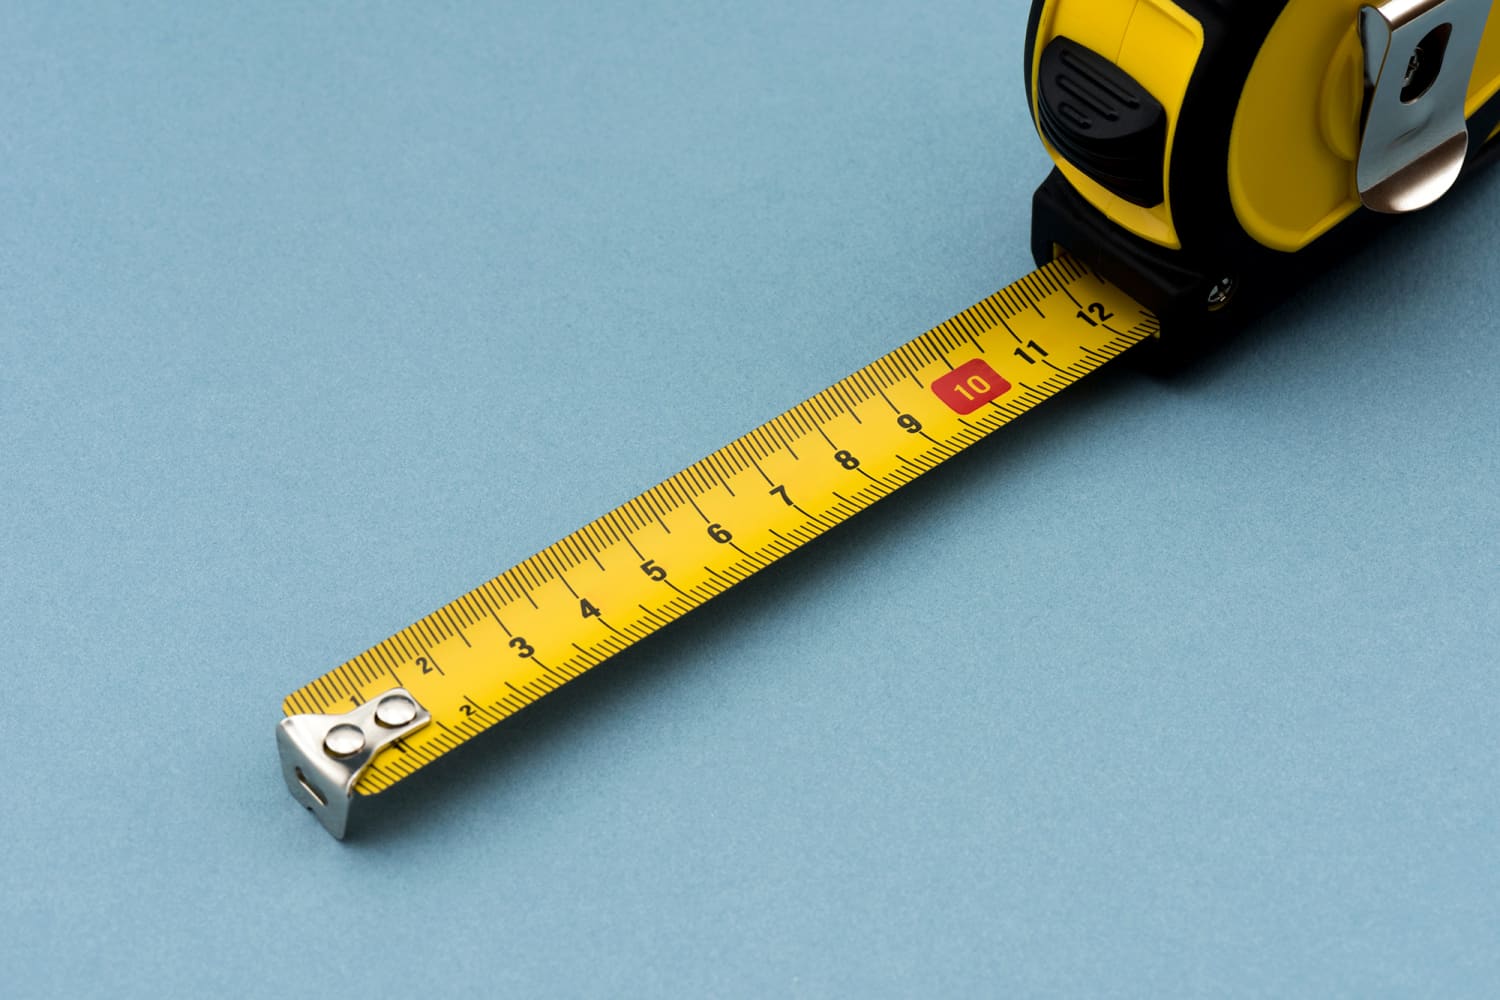 Tape Measure - For Measuring Yourself